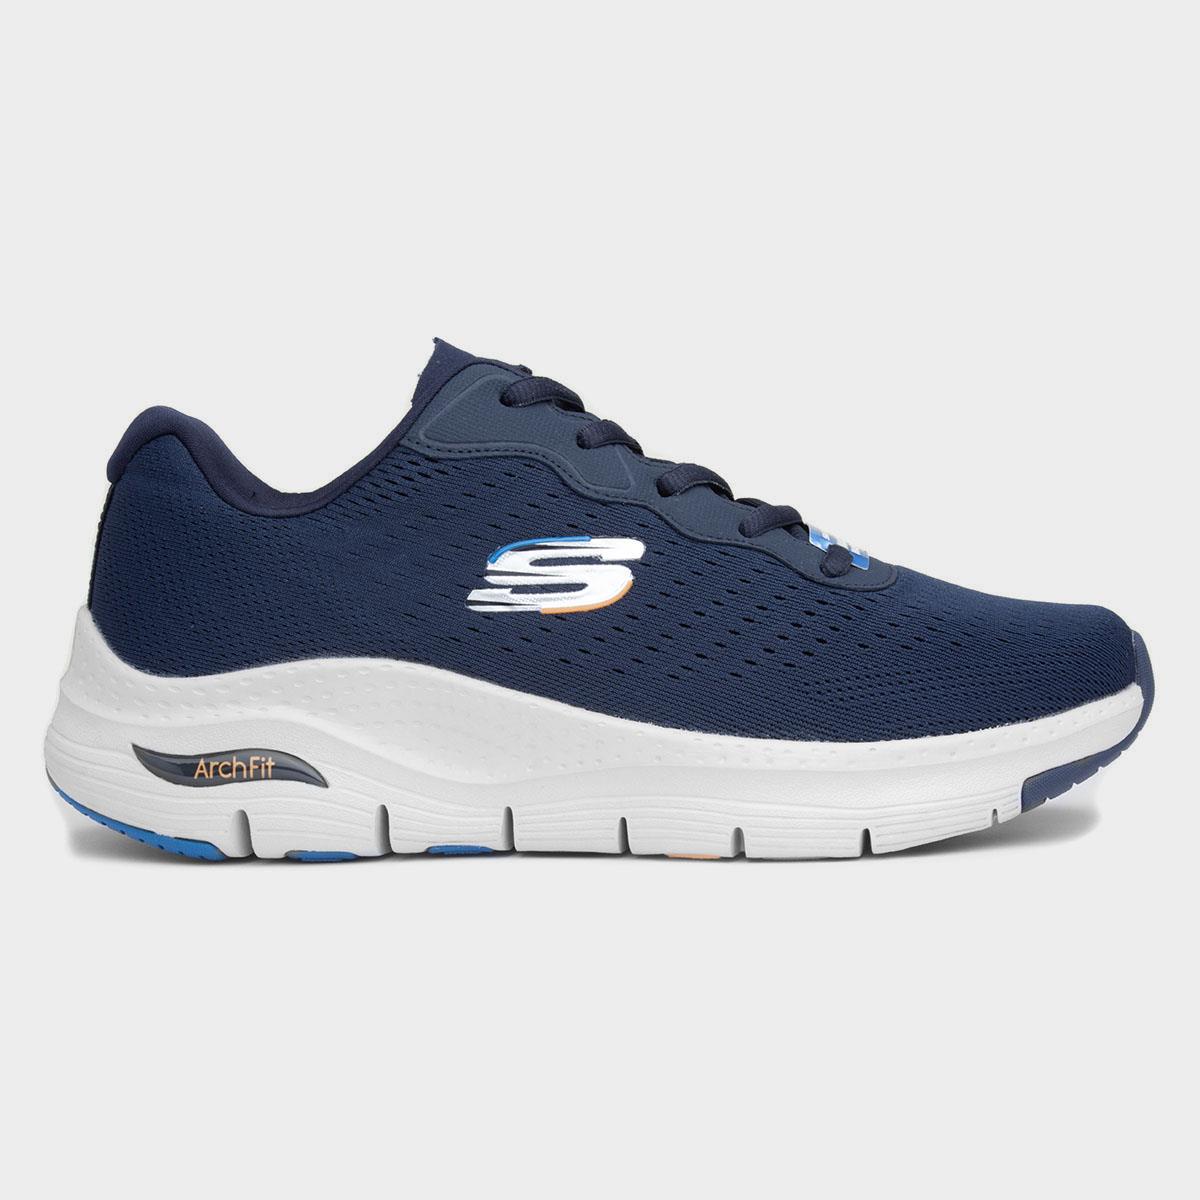 Skechers Arch Fit Infinity Cool Mens Navy Trainer-830287 | Shoe Zone